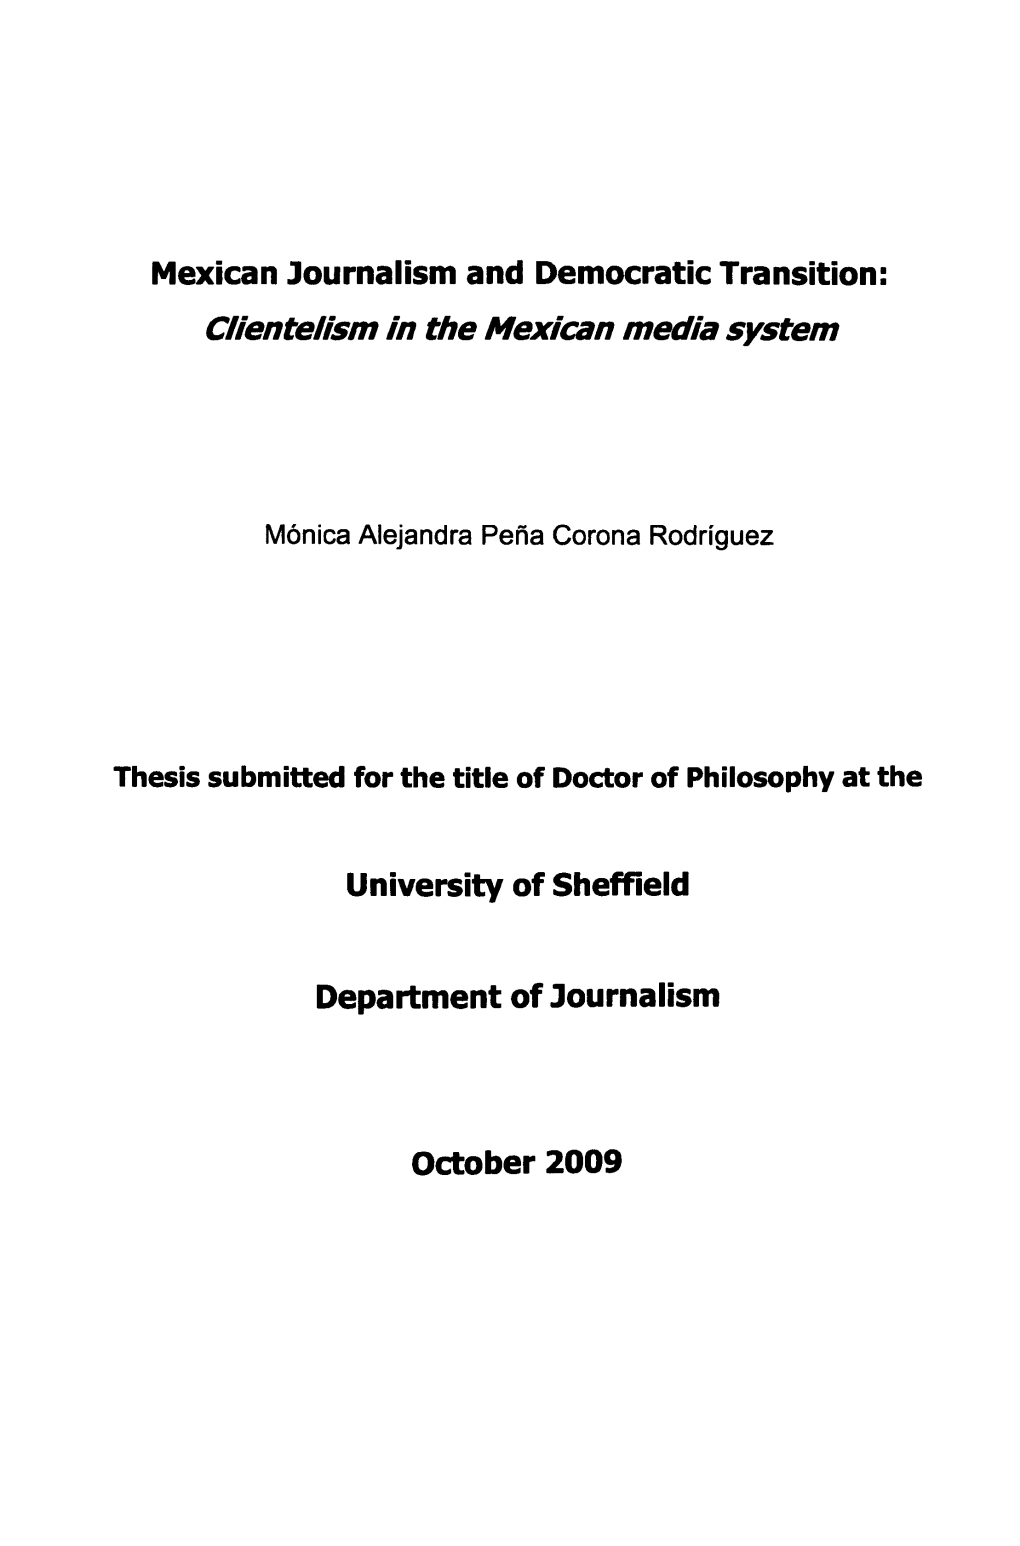 Mexican Lournalism and Democratic Transition: Clientelism in the Mexican Media System